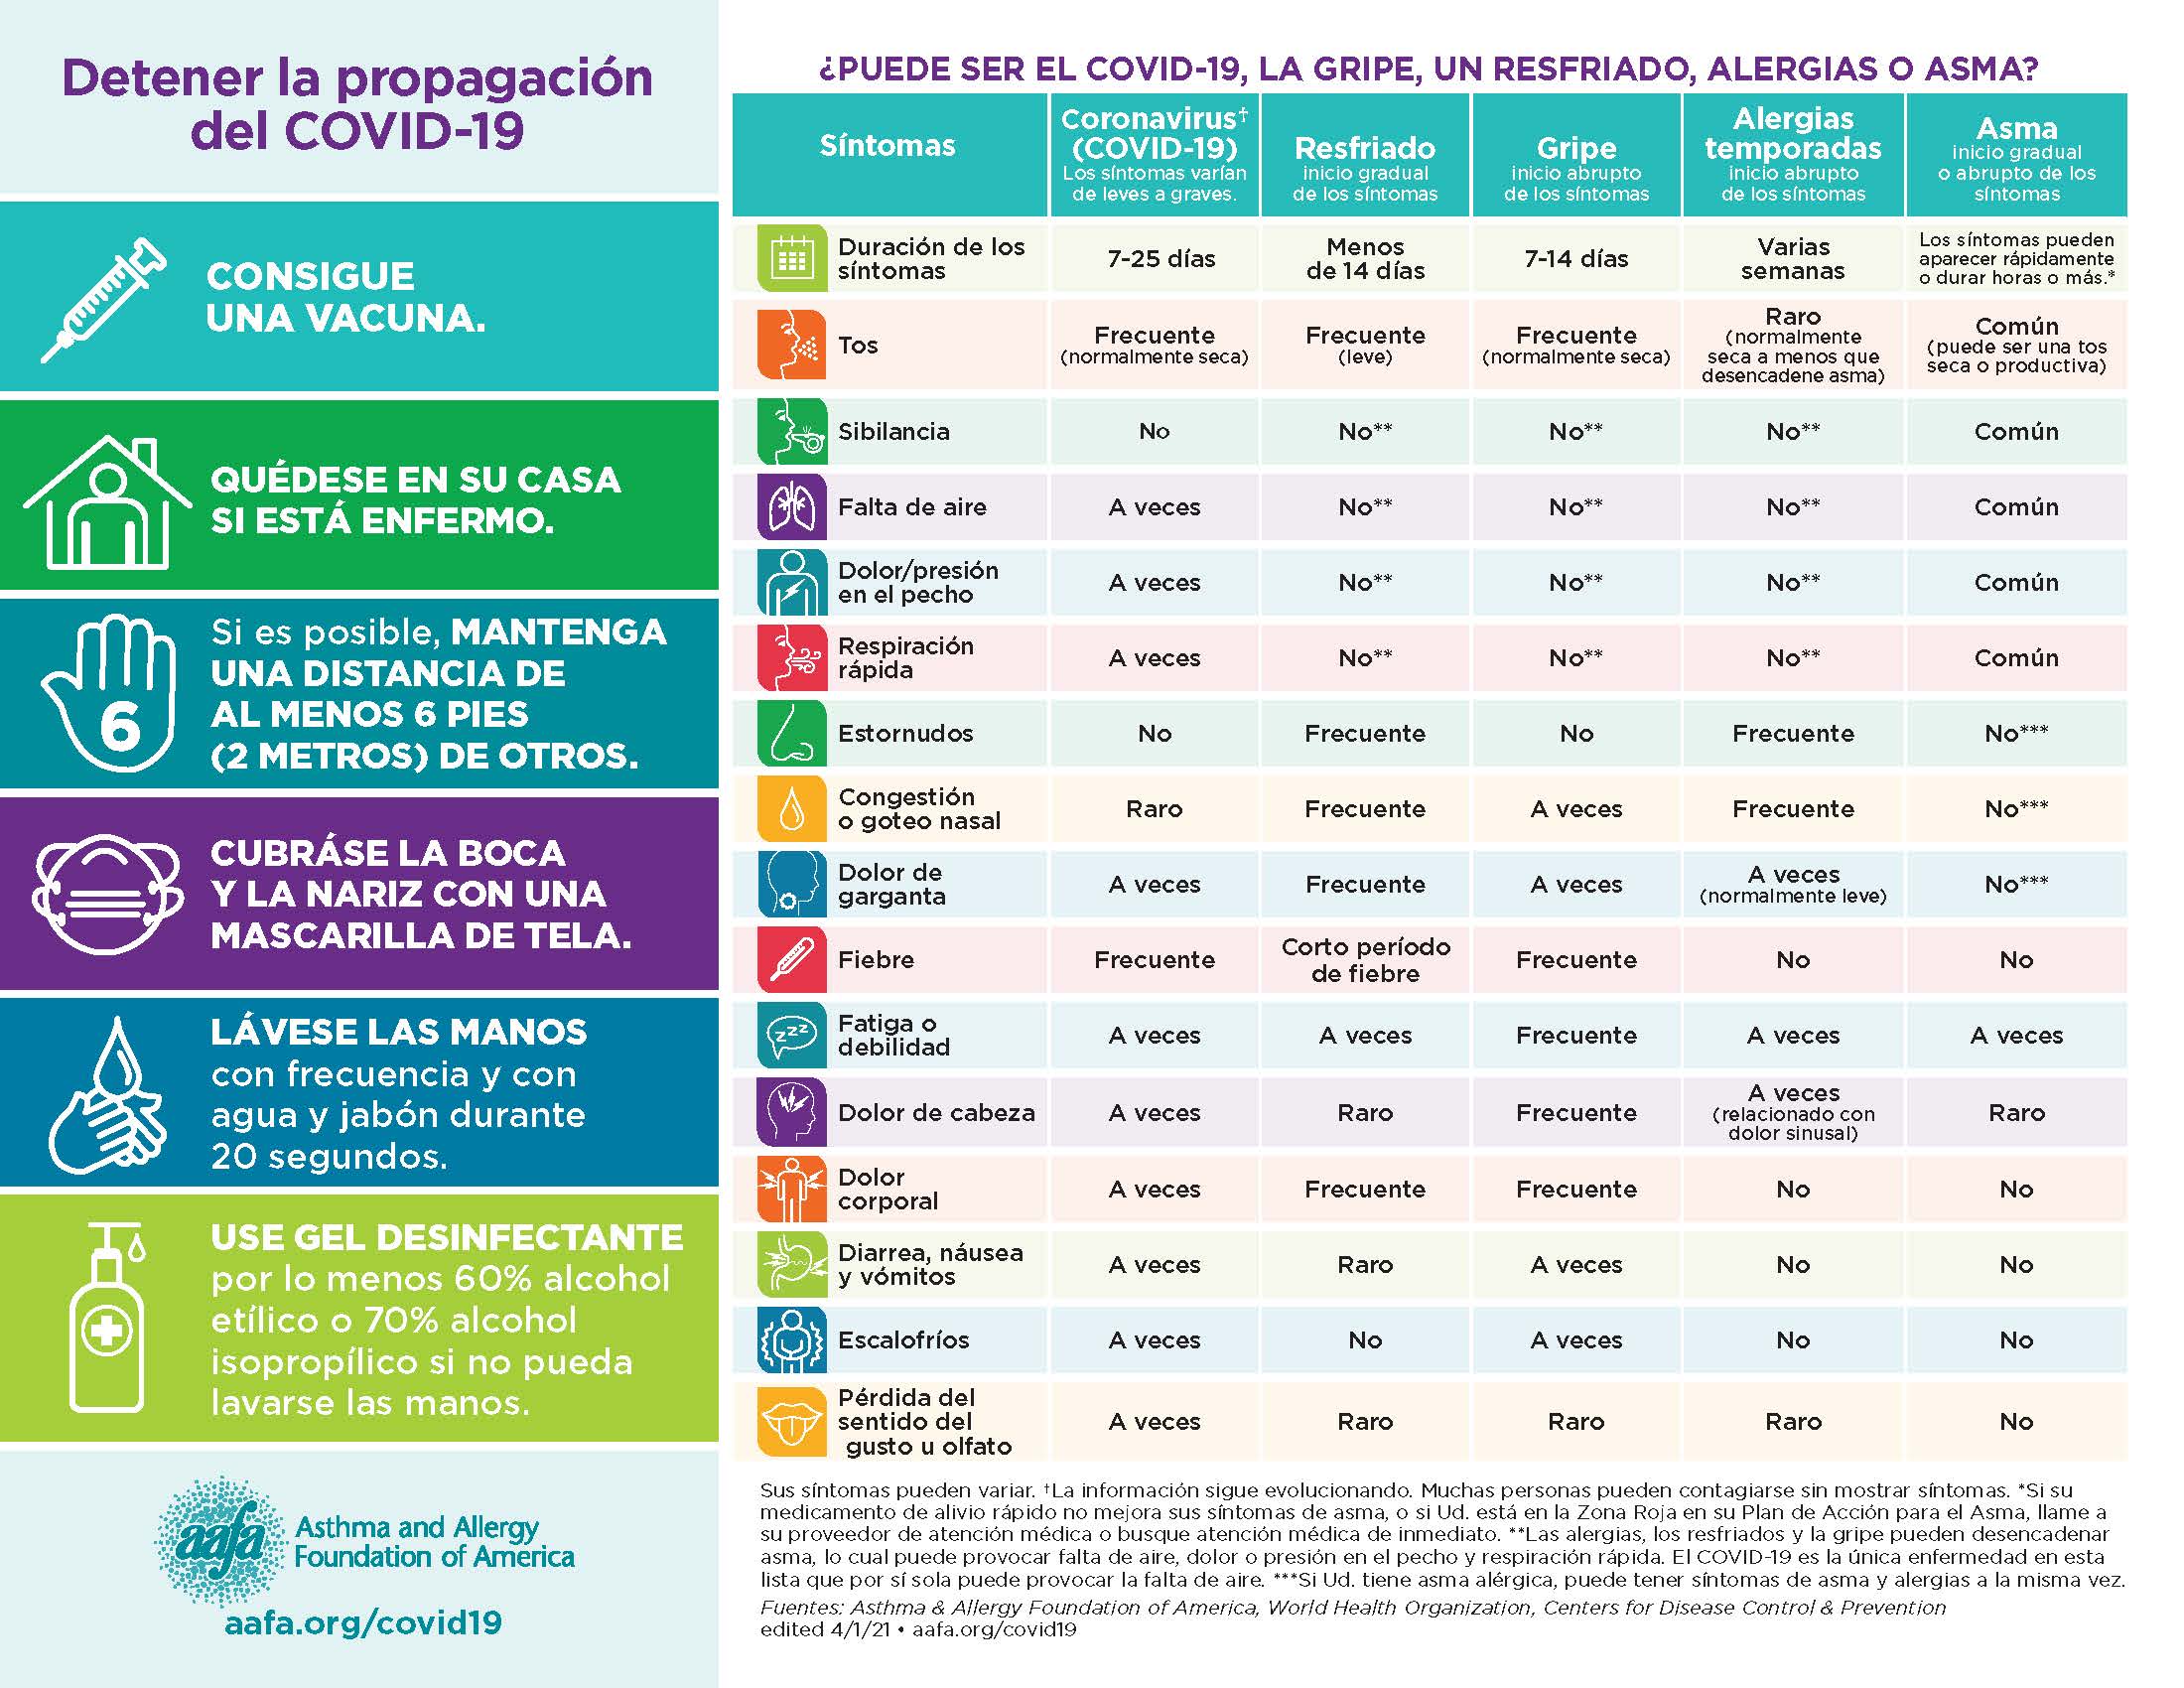 There are some symptoms that are similar between these respiratory illnesses and asthma. This chart can help you figure out if you may be feeling symptoms of asthma, allergies, or a respiratory illness like COVID-19, the flu, or a cold. (Spanish)